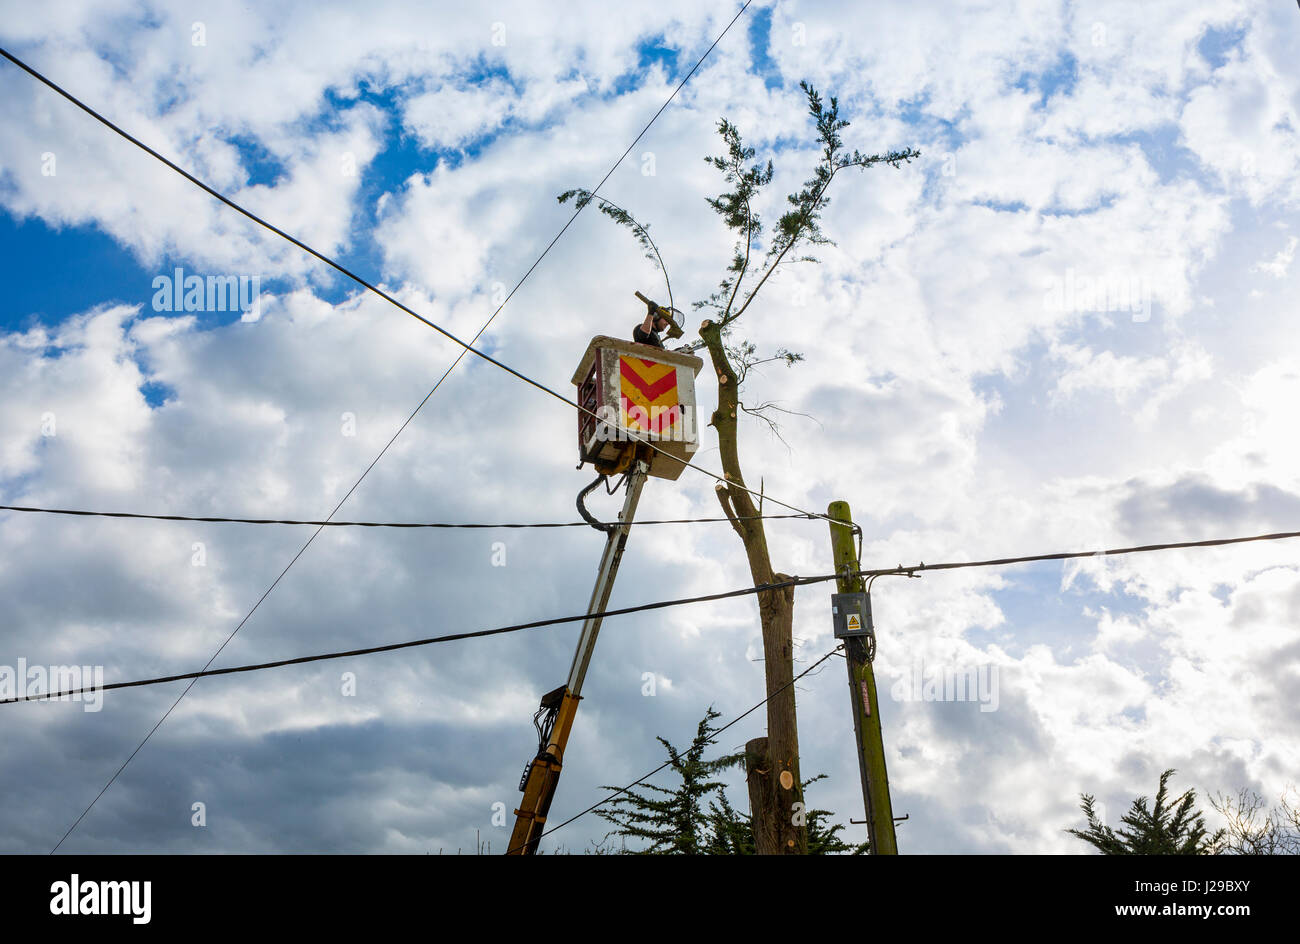 A tree surgeon in a cherry picker aerial platform removing a tree from the top down using a chain saw. Stock Photo